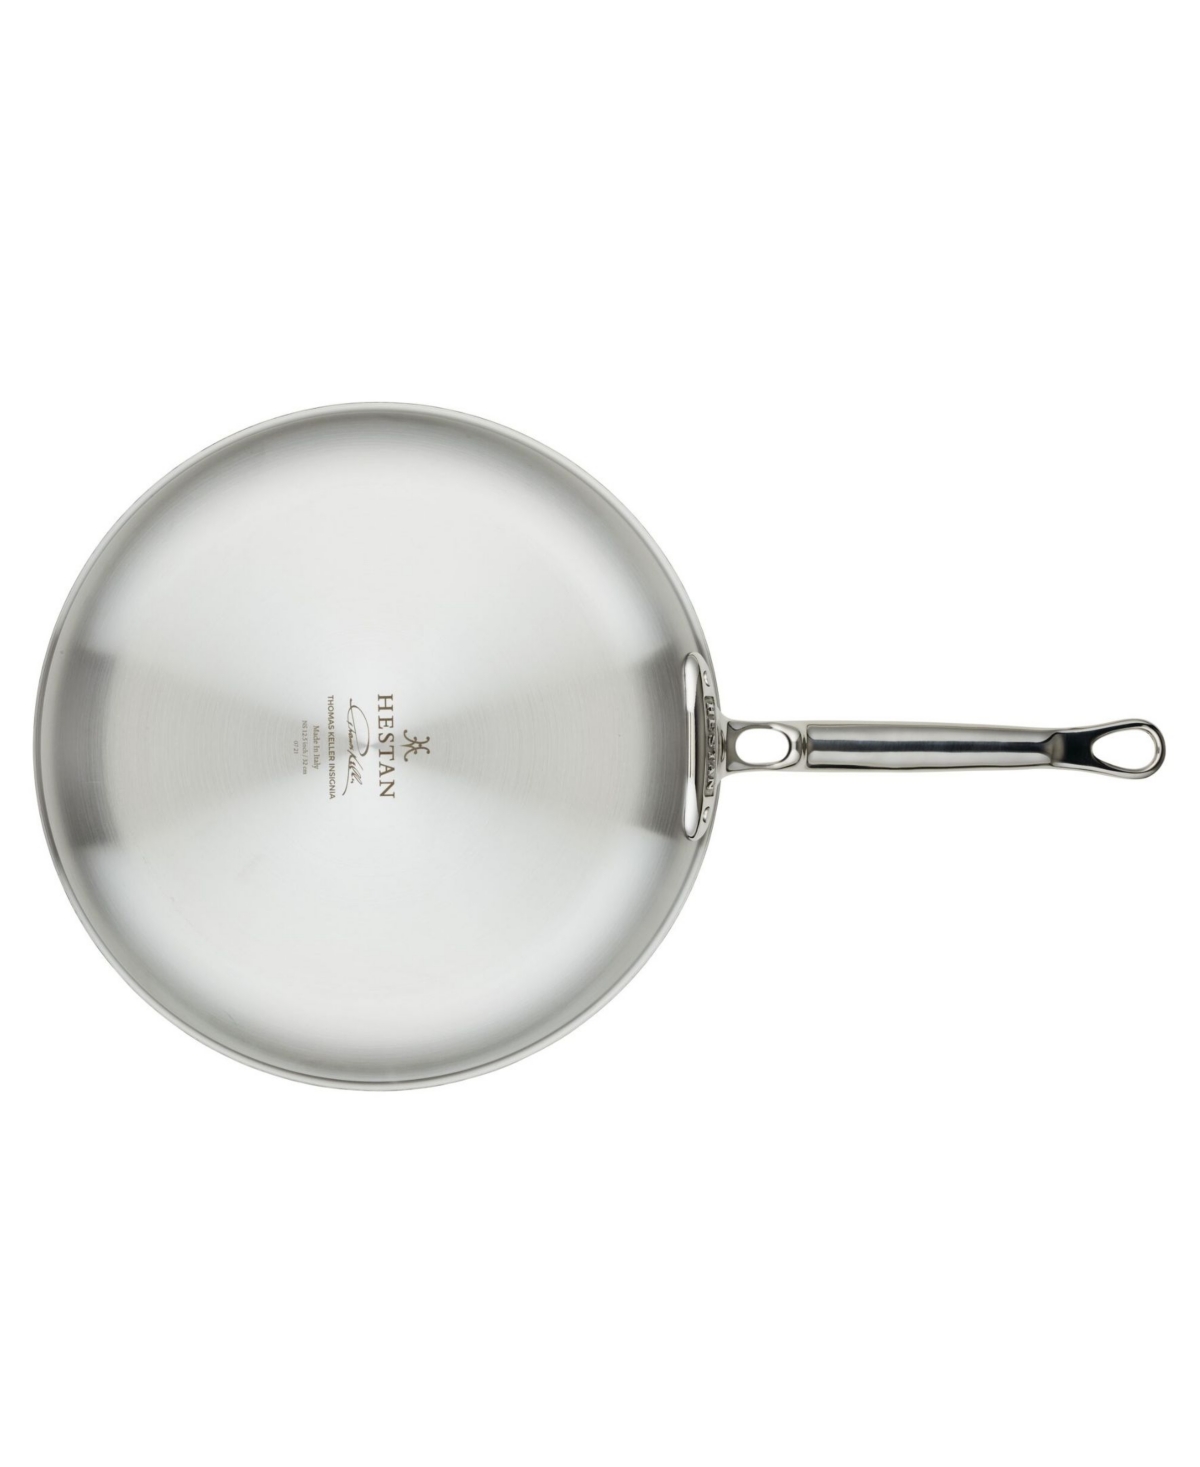 Shop Hestan Thomas Keller Insignia Commercial Clad Stainless Steel With Titum Nonstick 12.5" Open Saute Pan In No Color